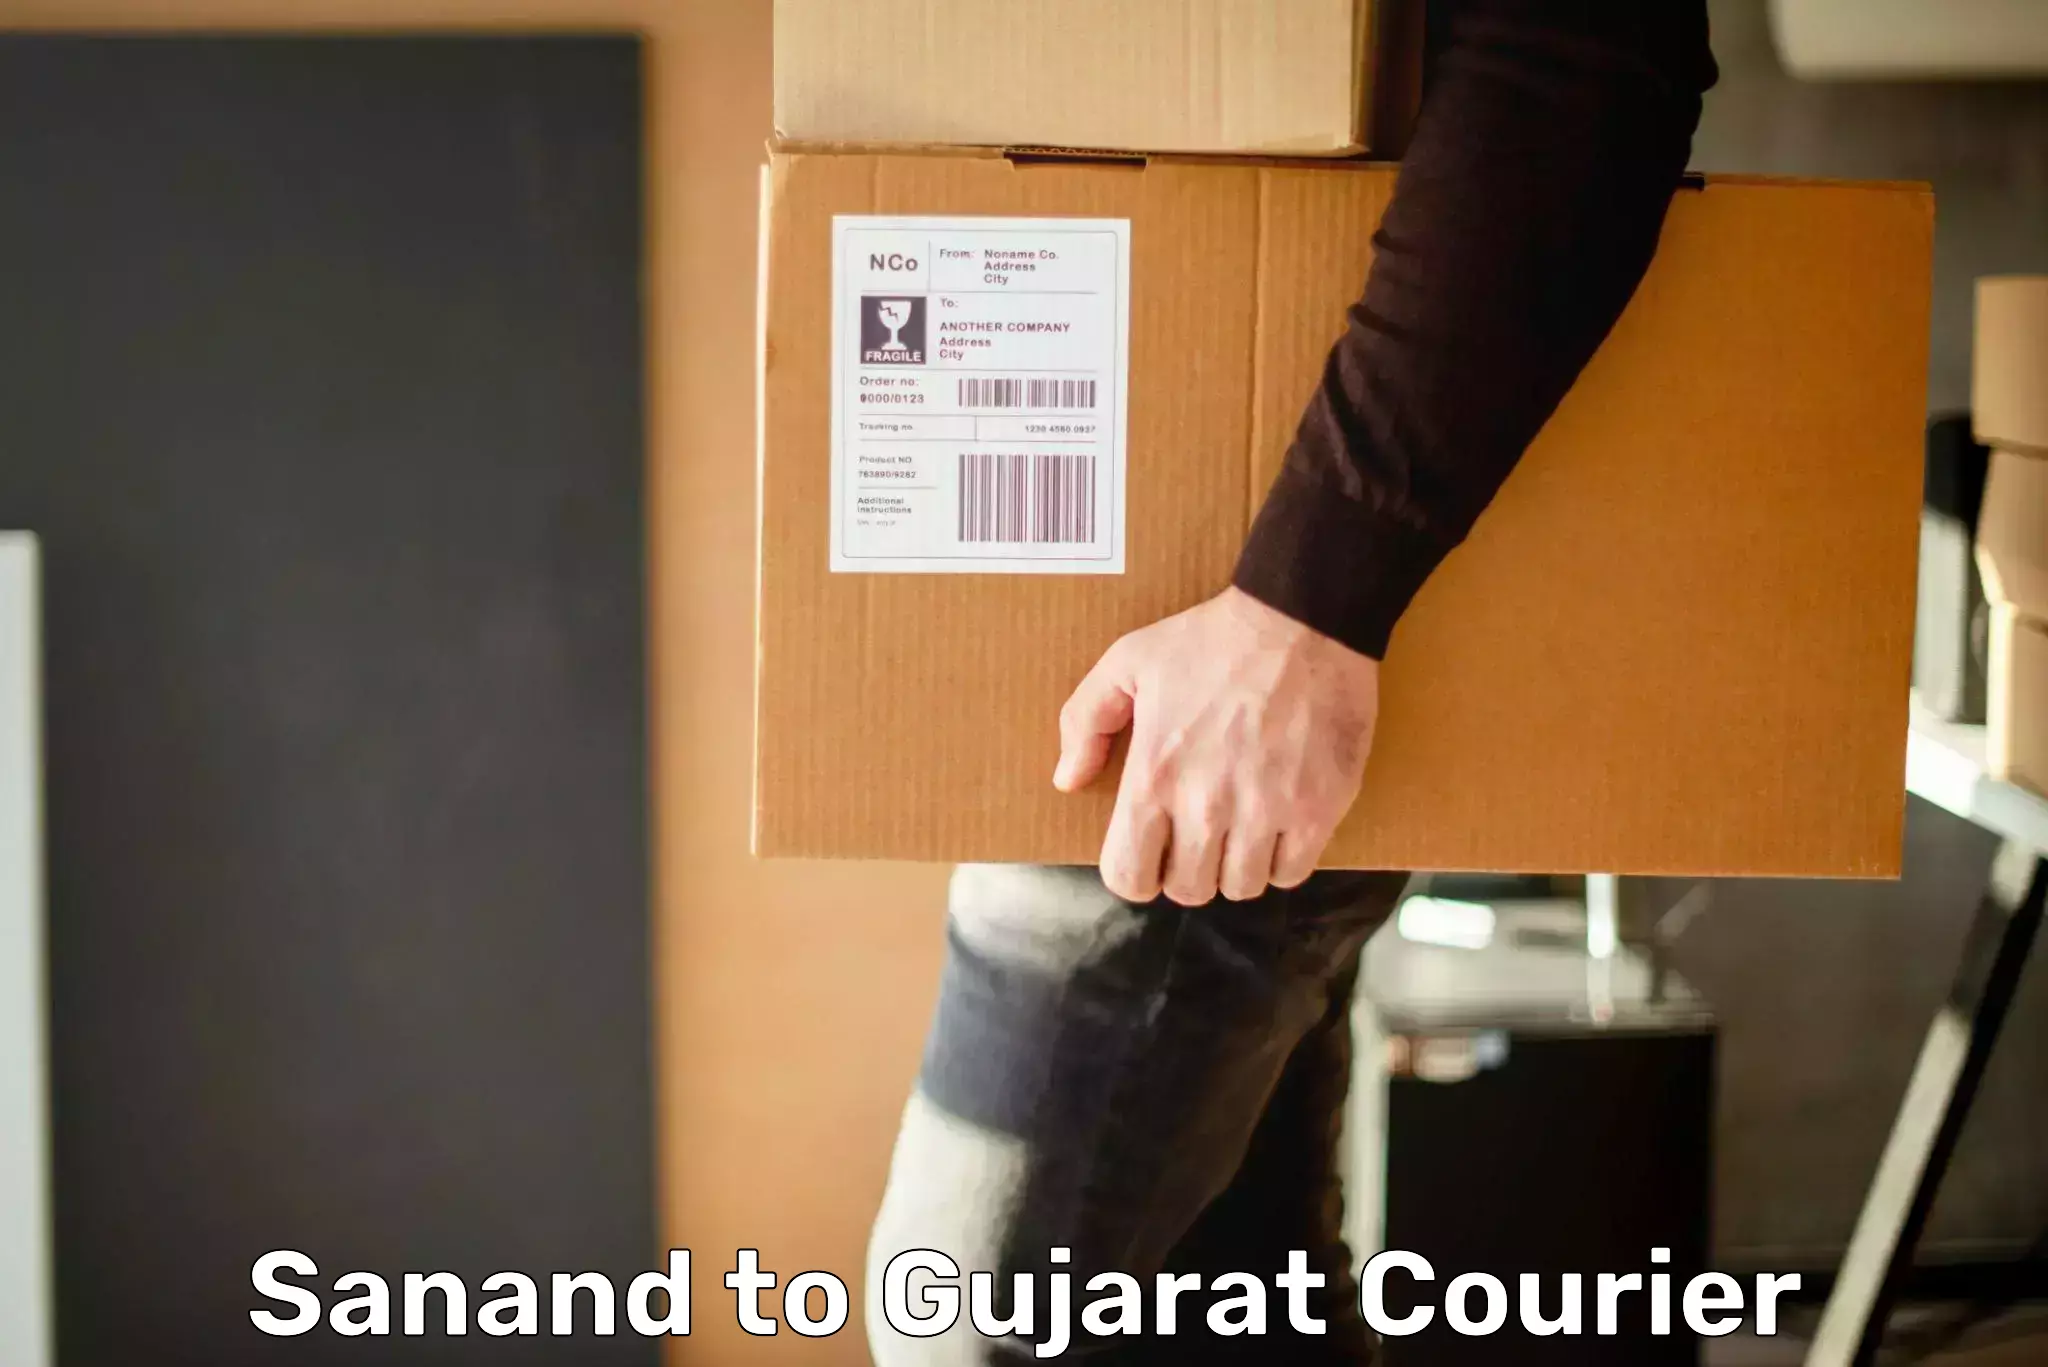 Next-generation courier services Sanand to Ahmedabad